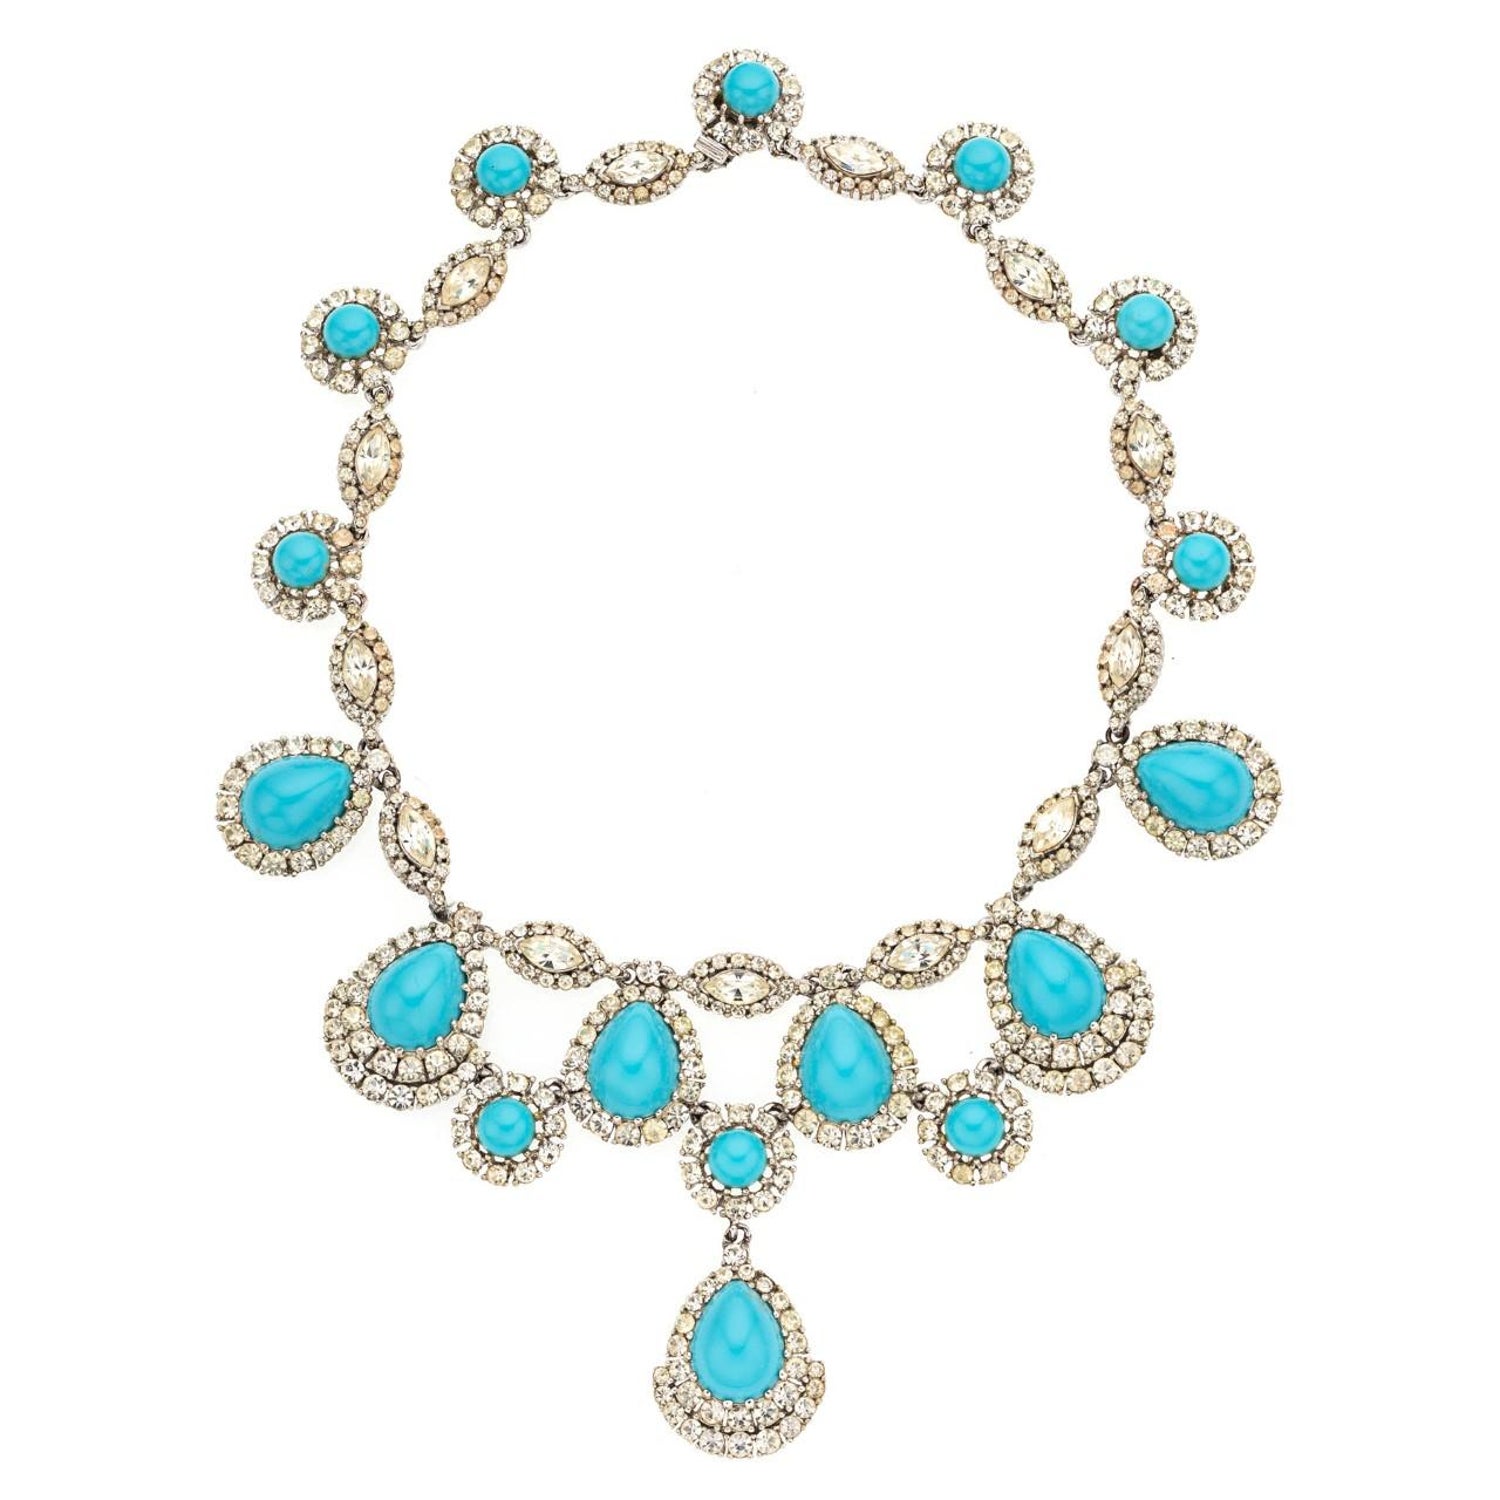 Film Star Zsa Zsa Gabor's Ciner 1960s Faux Turquoise Diamond Necklace Suite  at 1stDibs | zsa zsa gabor jewelry